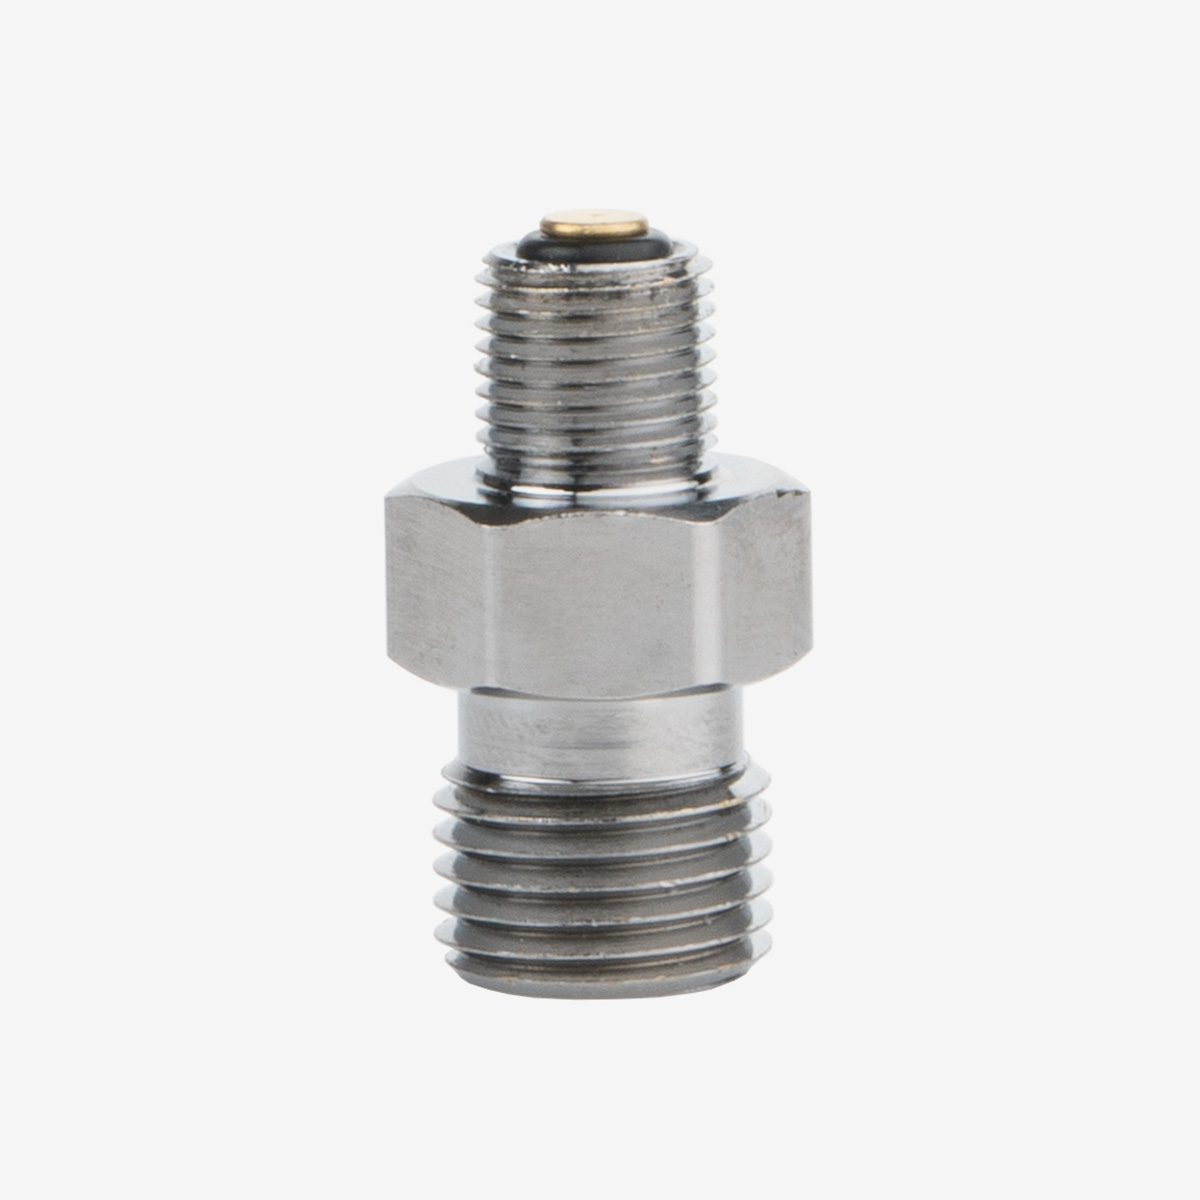 Silver one-way check valve DISS oxygen fitting on white background